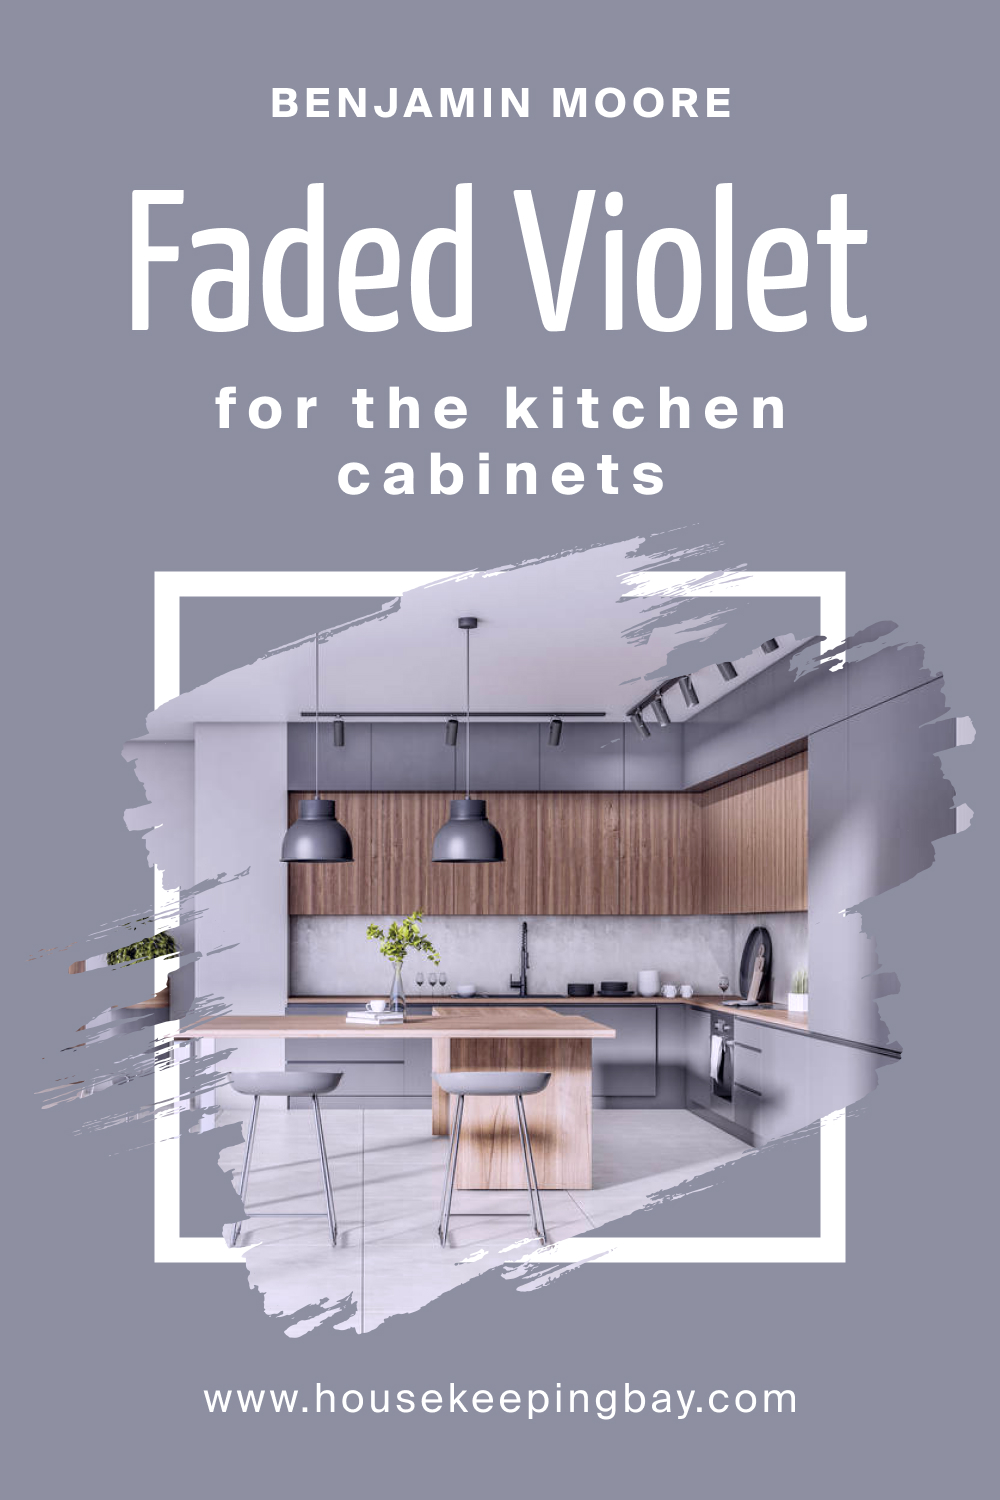 How to Use Faded Violet CSP-455 on the Kitchen Cabinets?